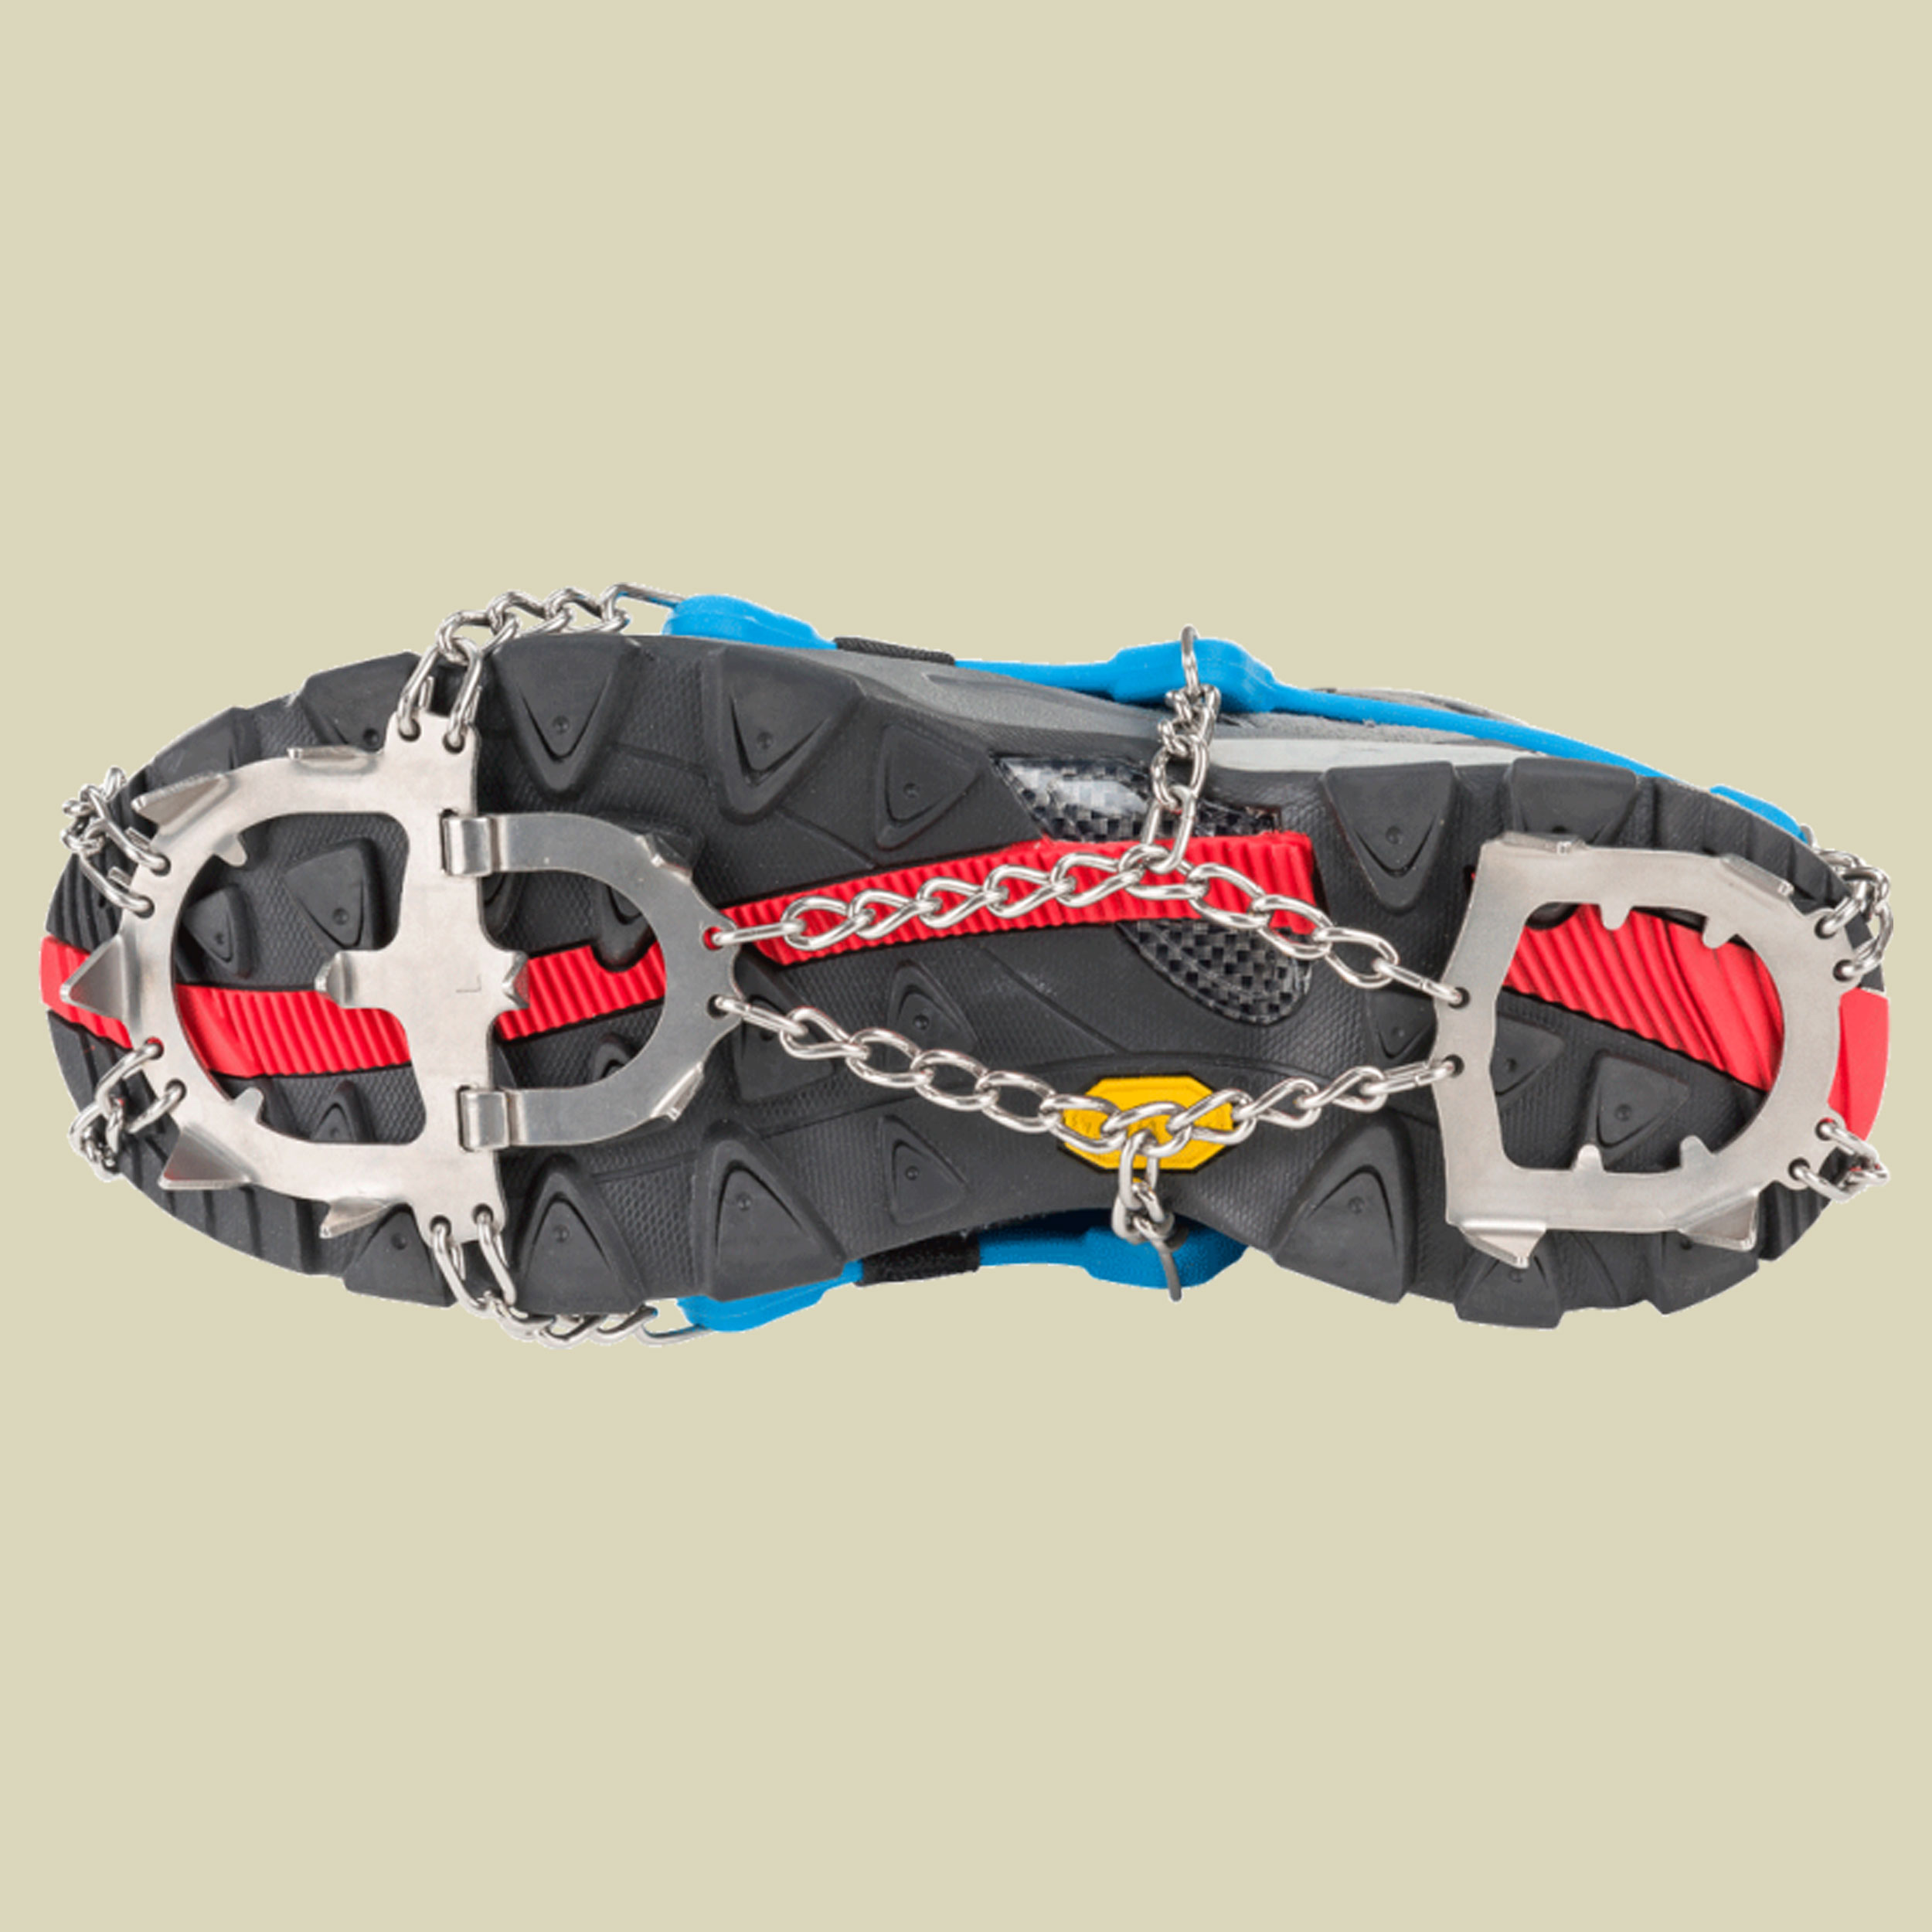 Ice Traction Plus Crampons Größe L Farbe blue